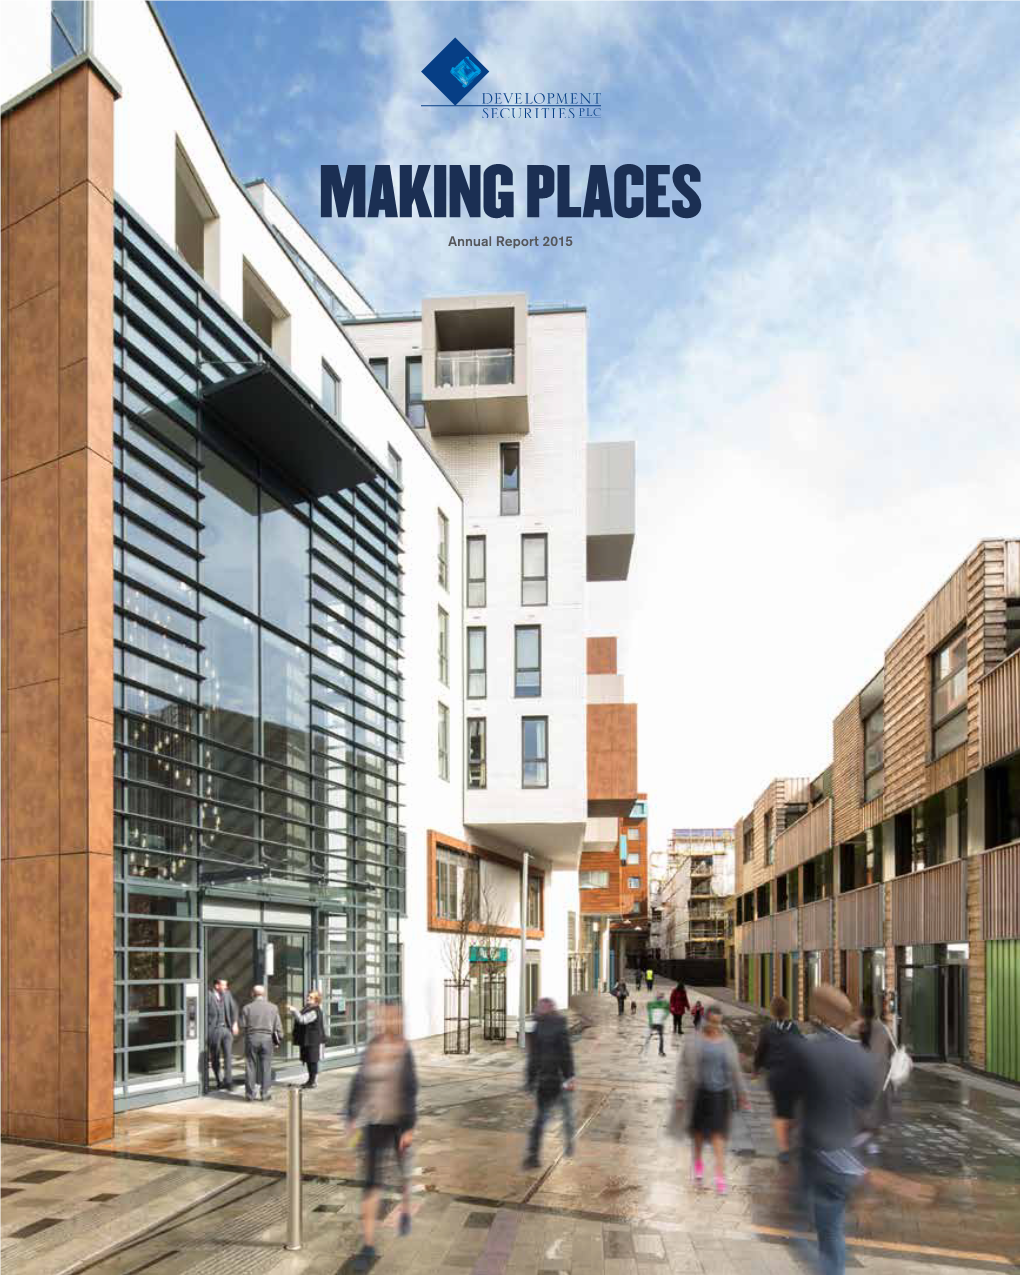 MAKING PLACES Annual Report 2015